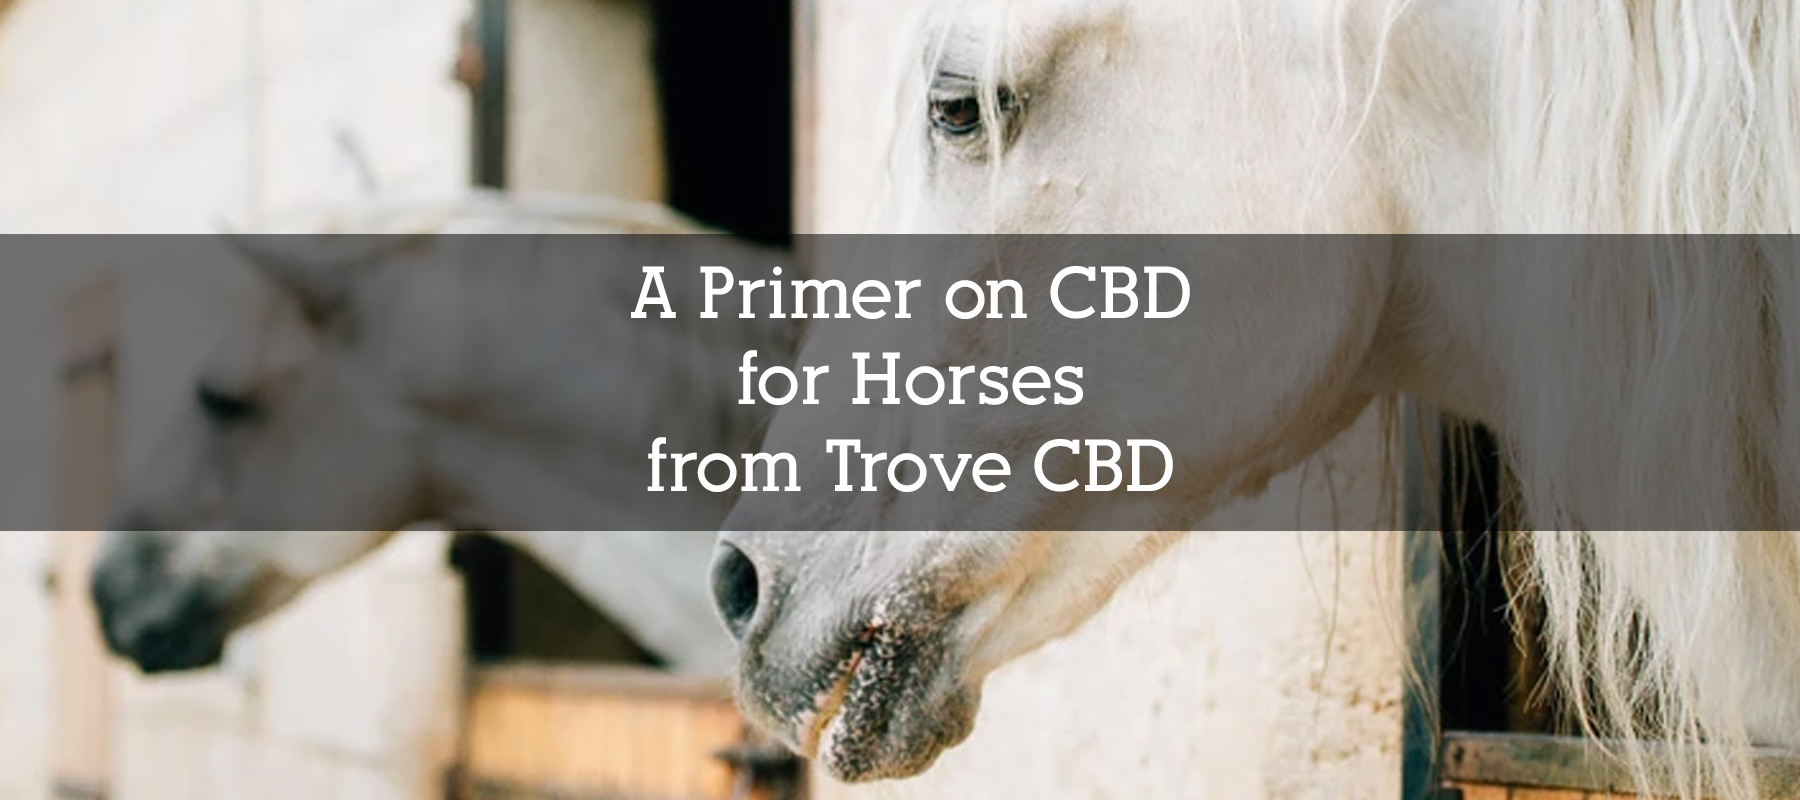 A Primer on CBD for Horses from Trove CBD